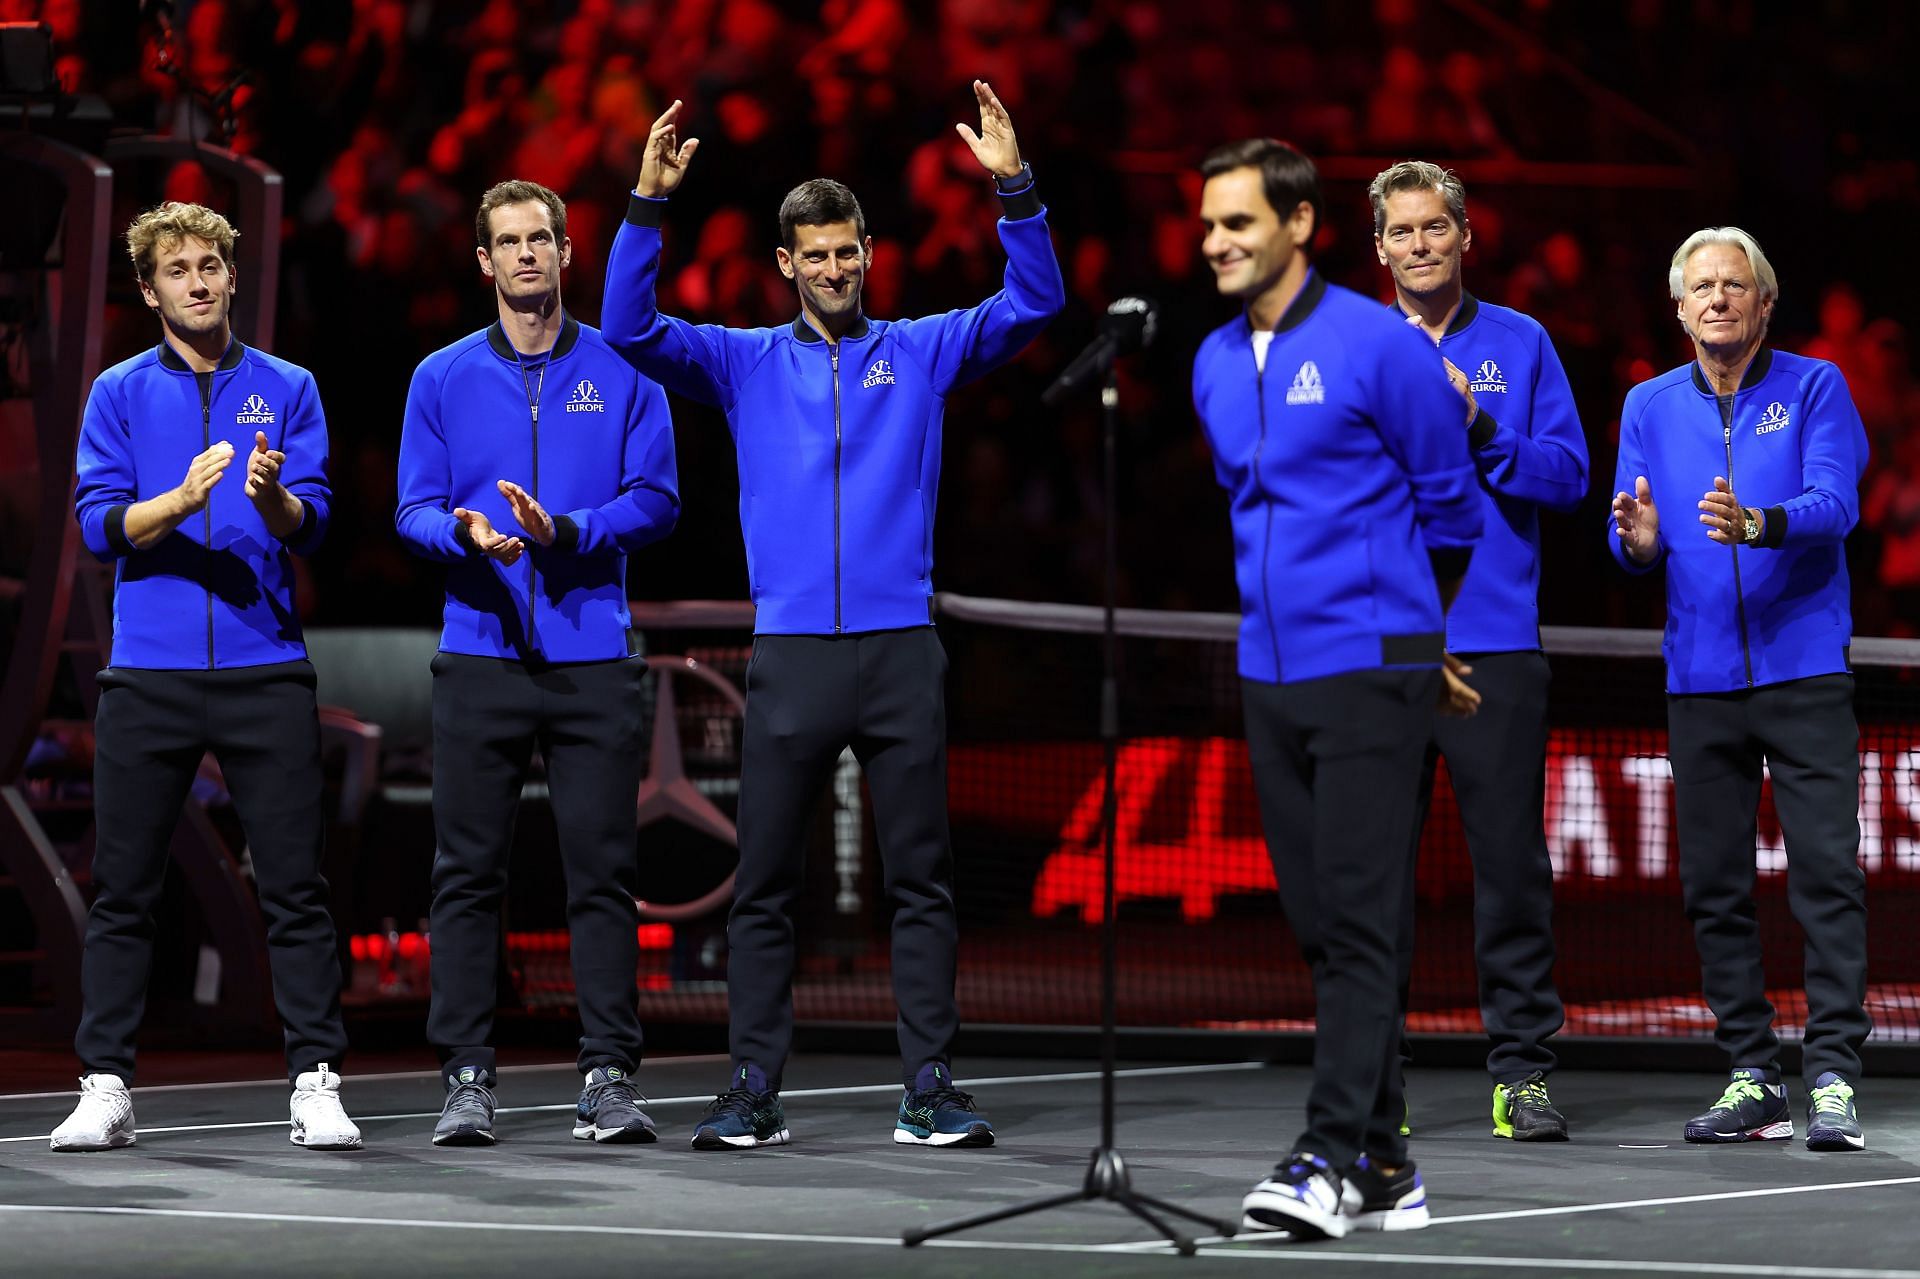 Roger Federer during the Laver Cup. Photo by Julian Finney/Getty Images for Laver Cup